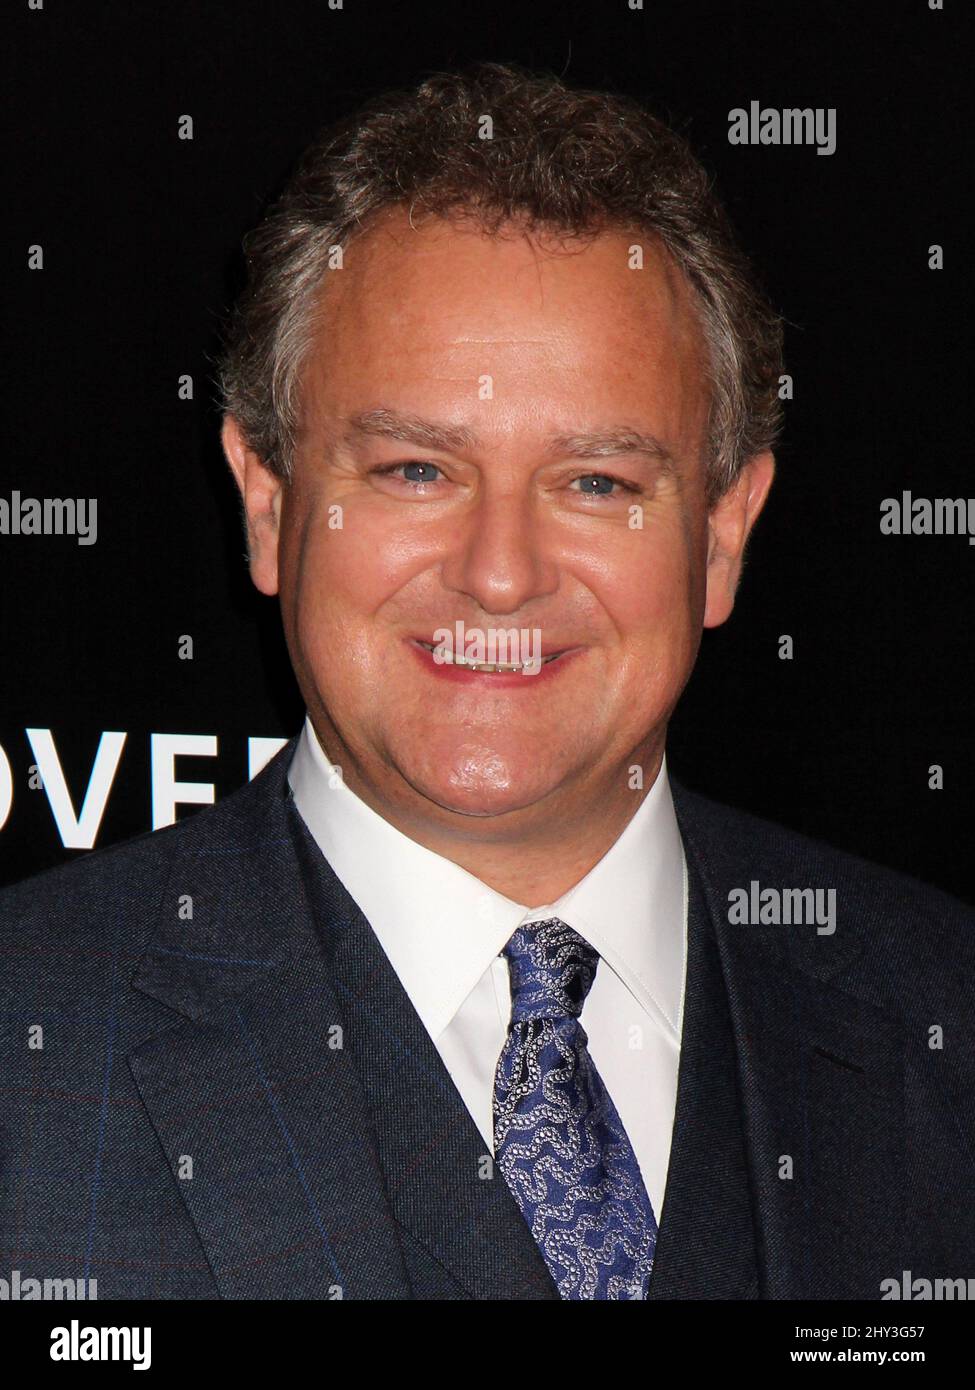 Hugh Bonneville attending the premiere of 'The Monuments Men' at the Ziegfeld Theater in New York City. Stock Photo